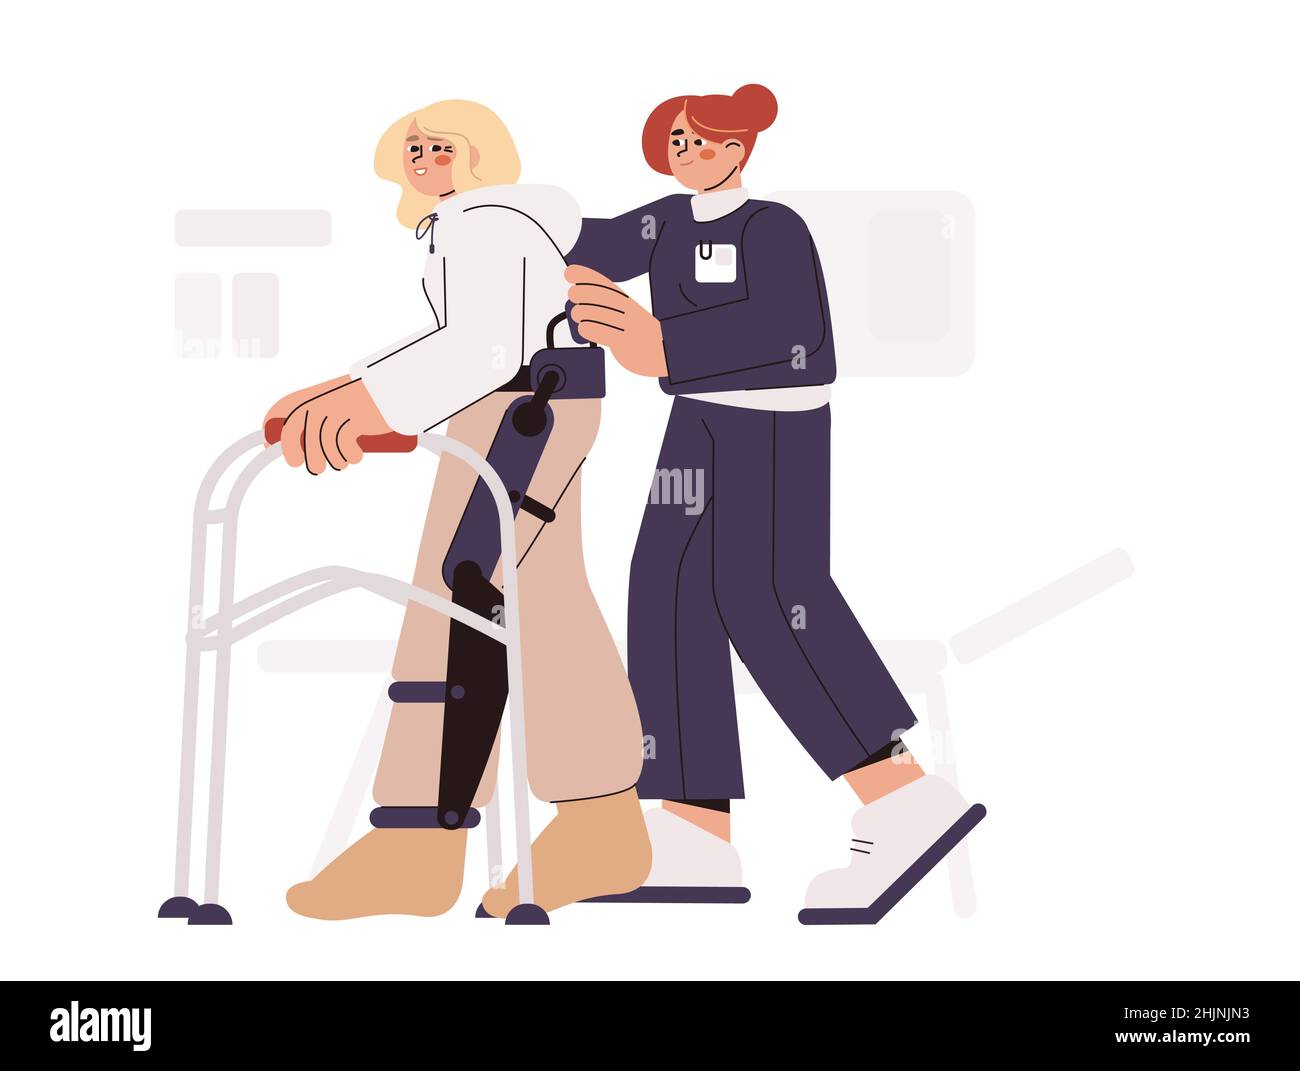 Flat physiotherapy doctor help patient to walk with rehab walkers. Physiotherapist support woman after surgery. Medical rehabilitation concept. Exercises for recovery and mobility leg after injury. Stock Vector